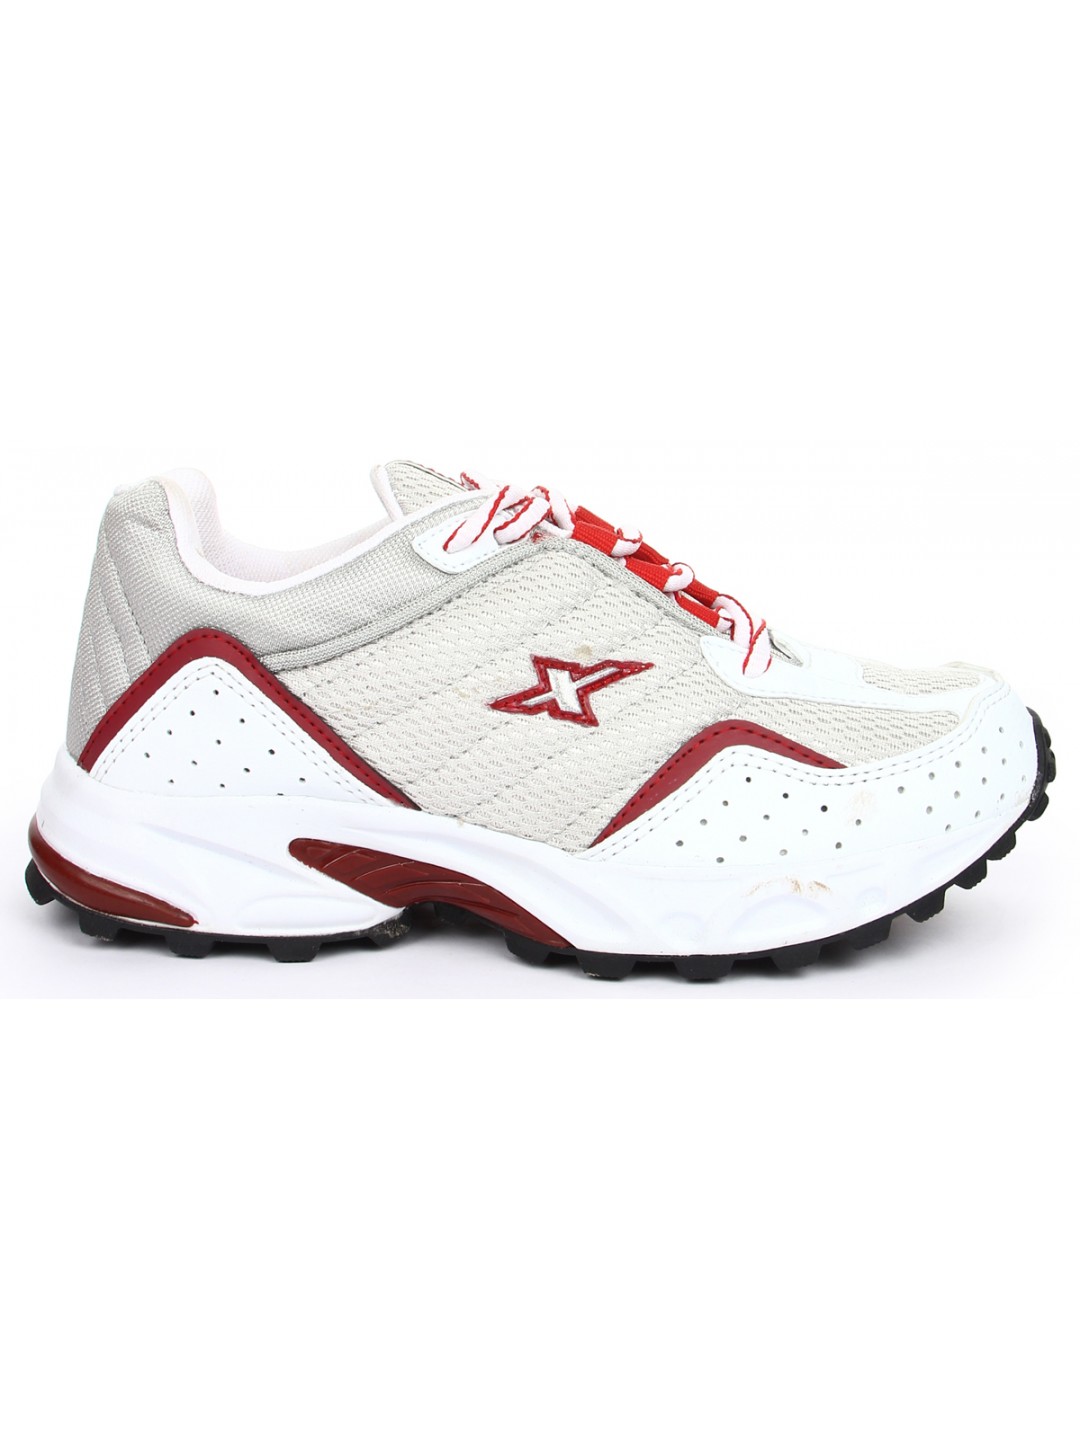 Silver \u0026 Red Running Shoes SM04-WSR